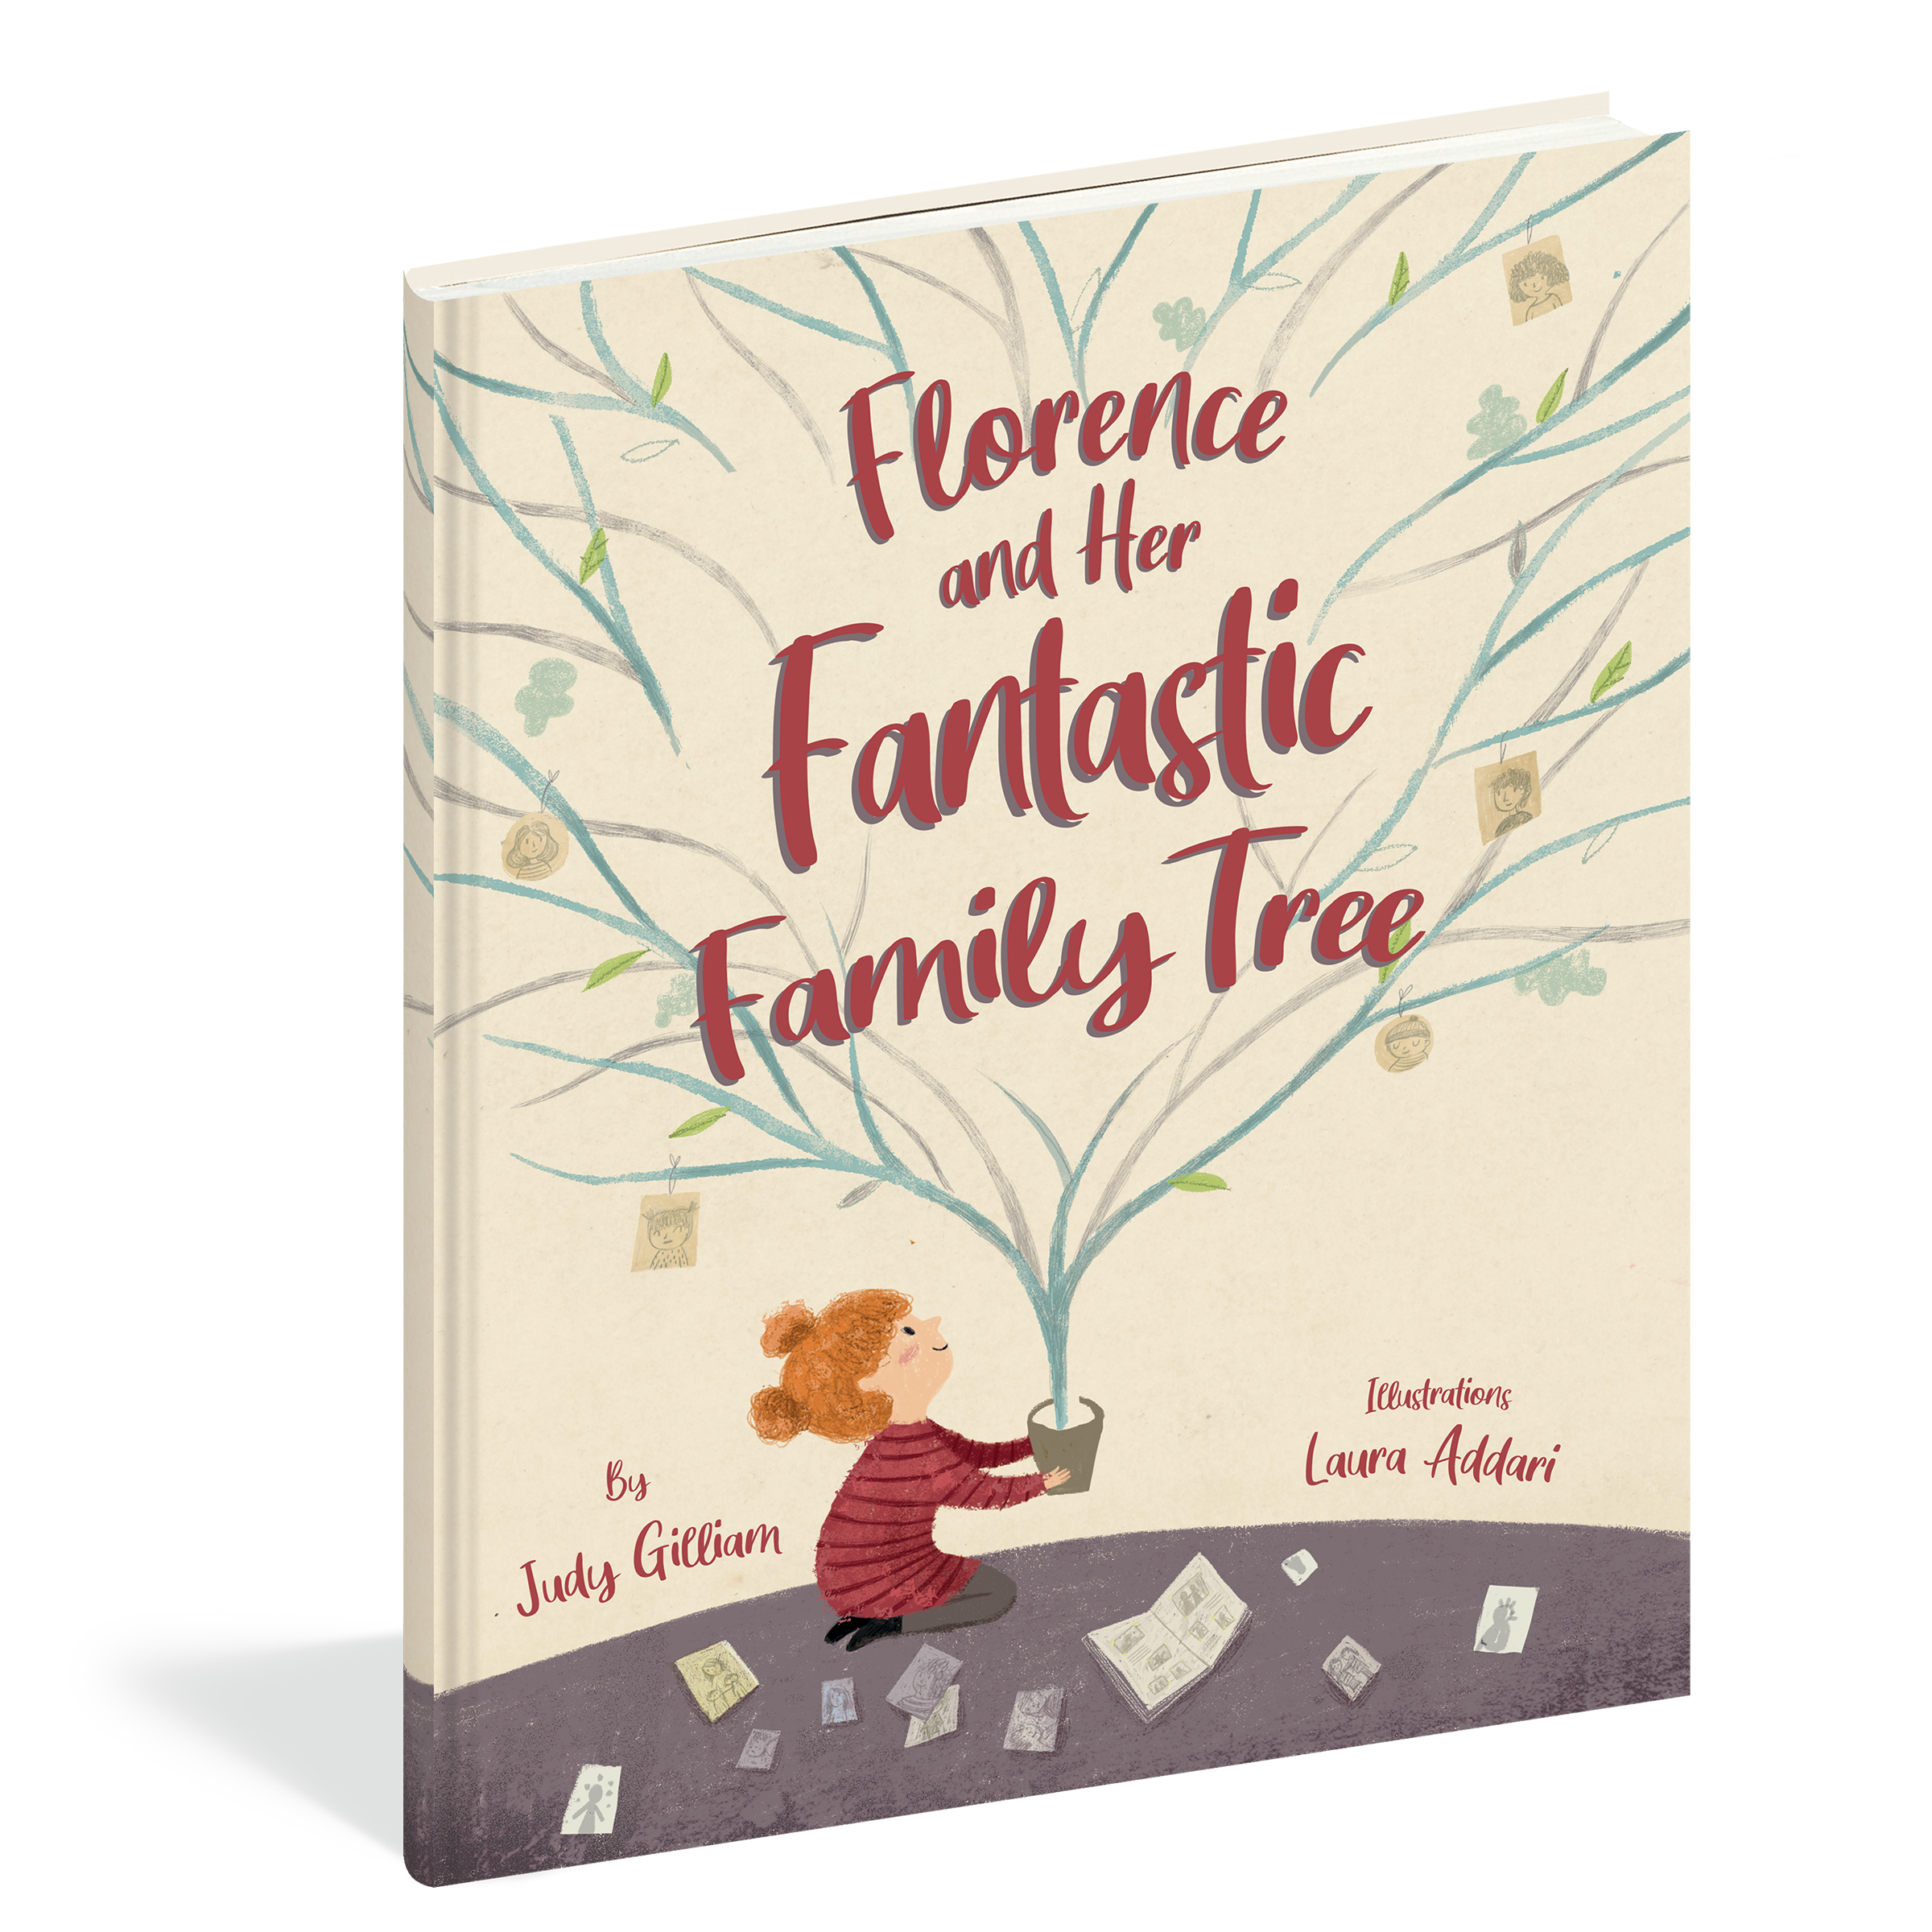 The cover of the book Florence and Her Fantastic Family Tree.